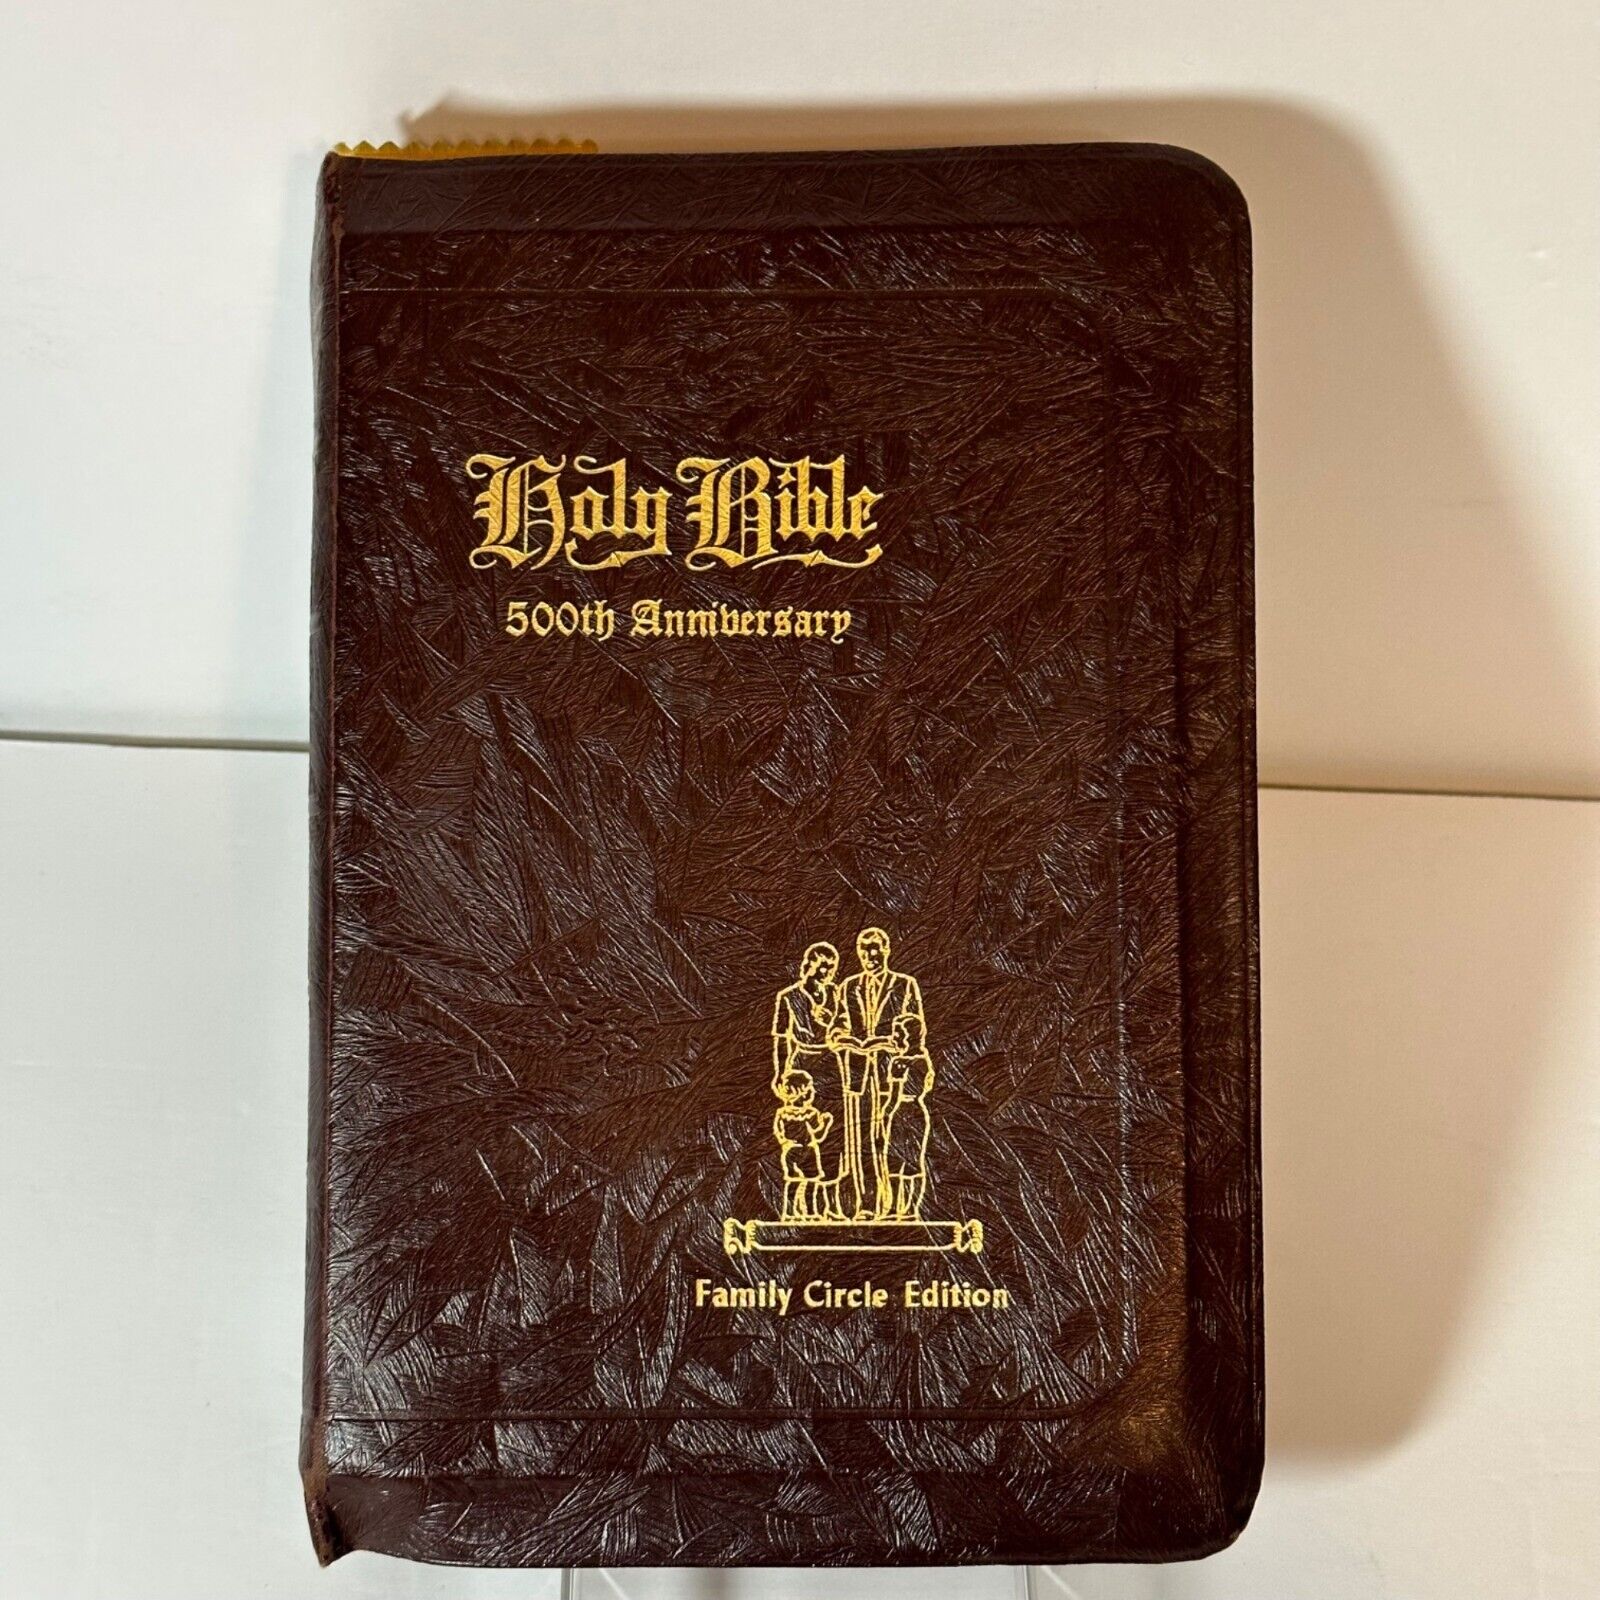 1944 Holy Bible 500th Anniversary Family Circle Edition Leather Leinweber READ